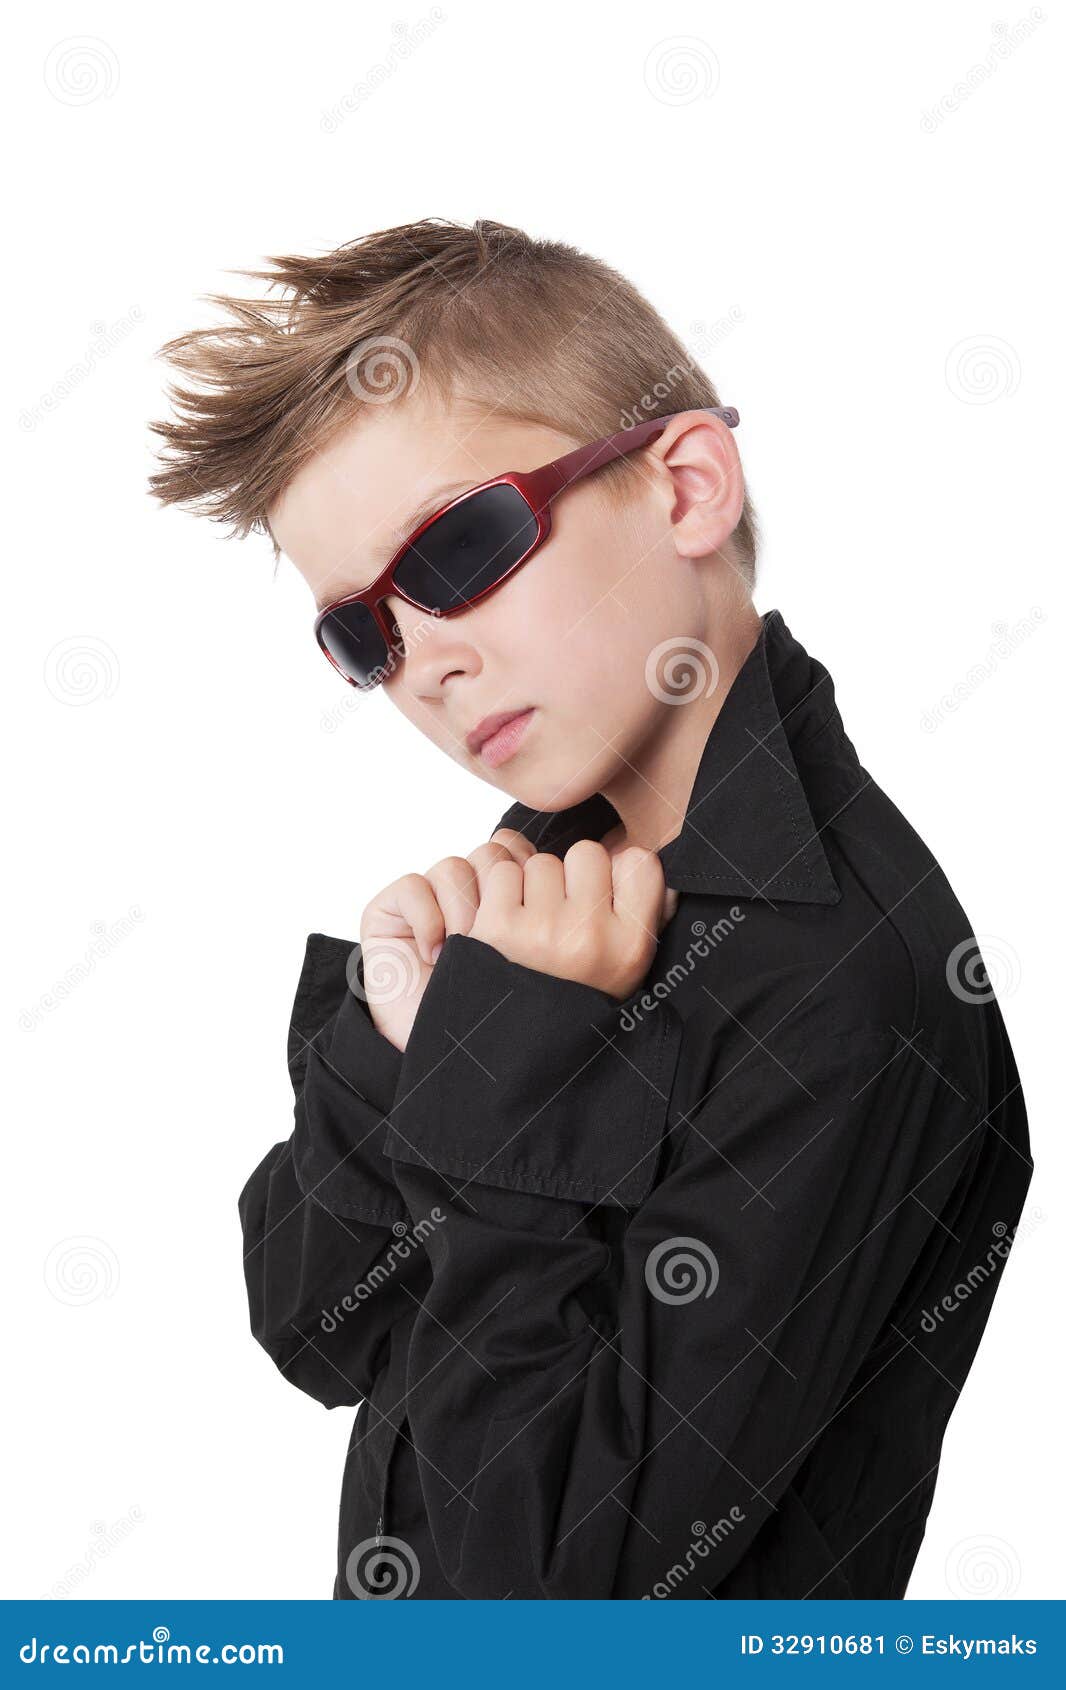 Cool Hipster. Stock Image - Image: 32910681